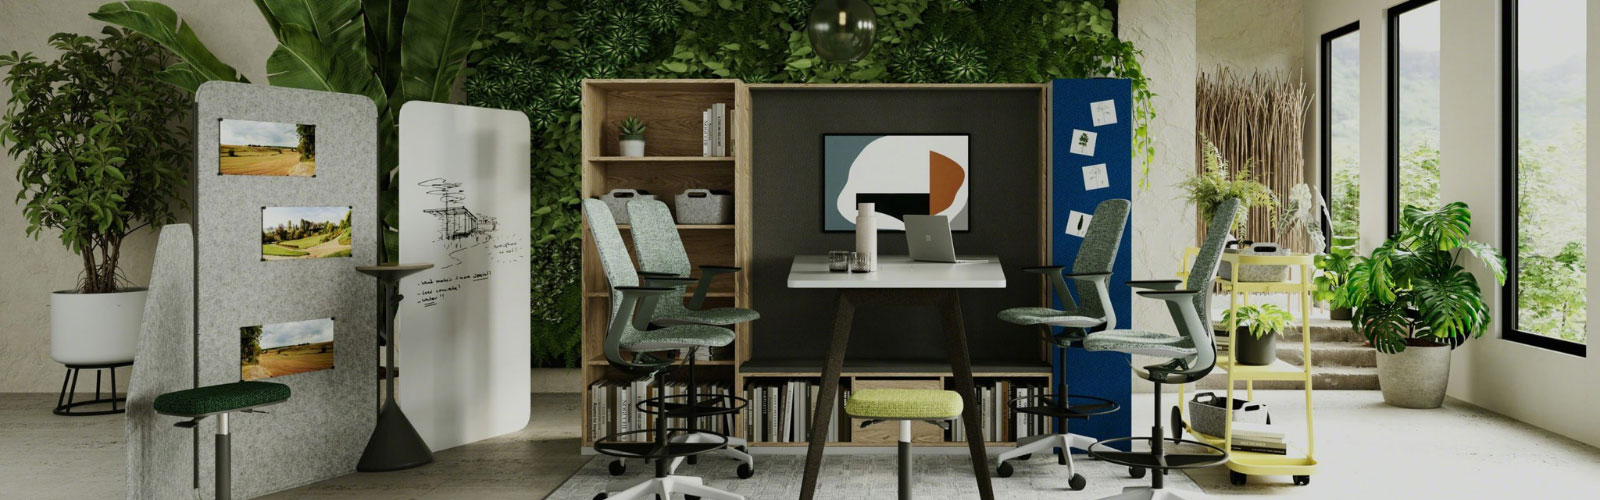 Modern collaborative working space integrating technology and biophilic design